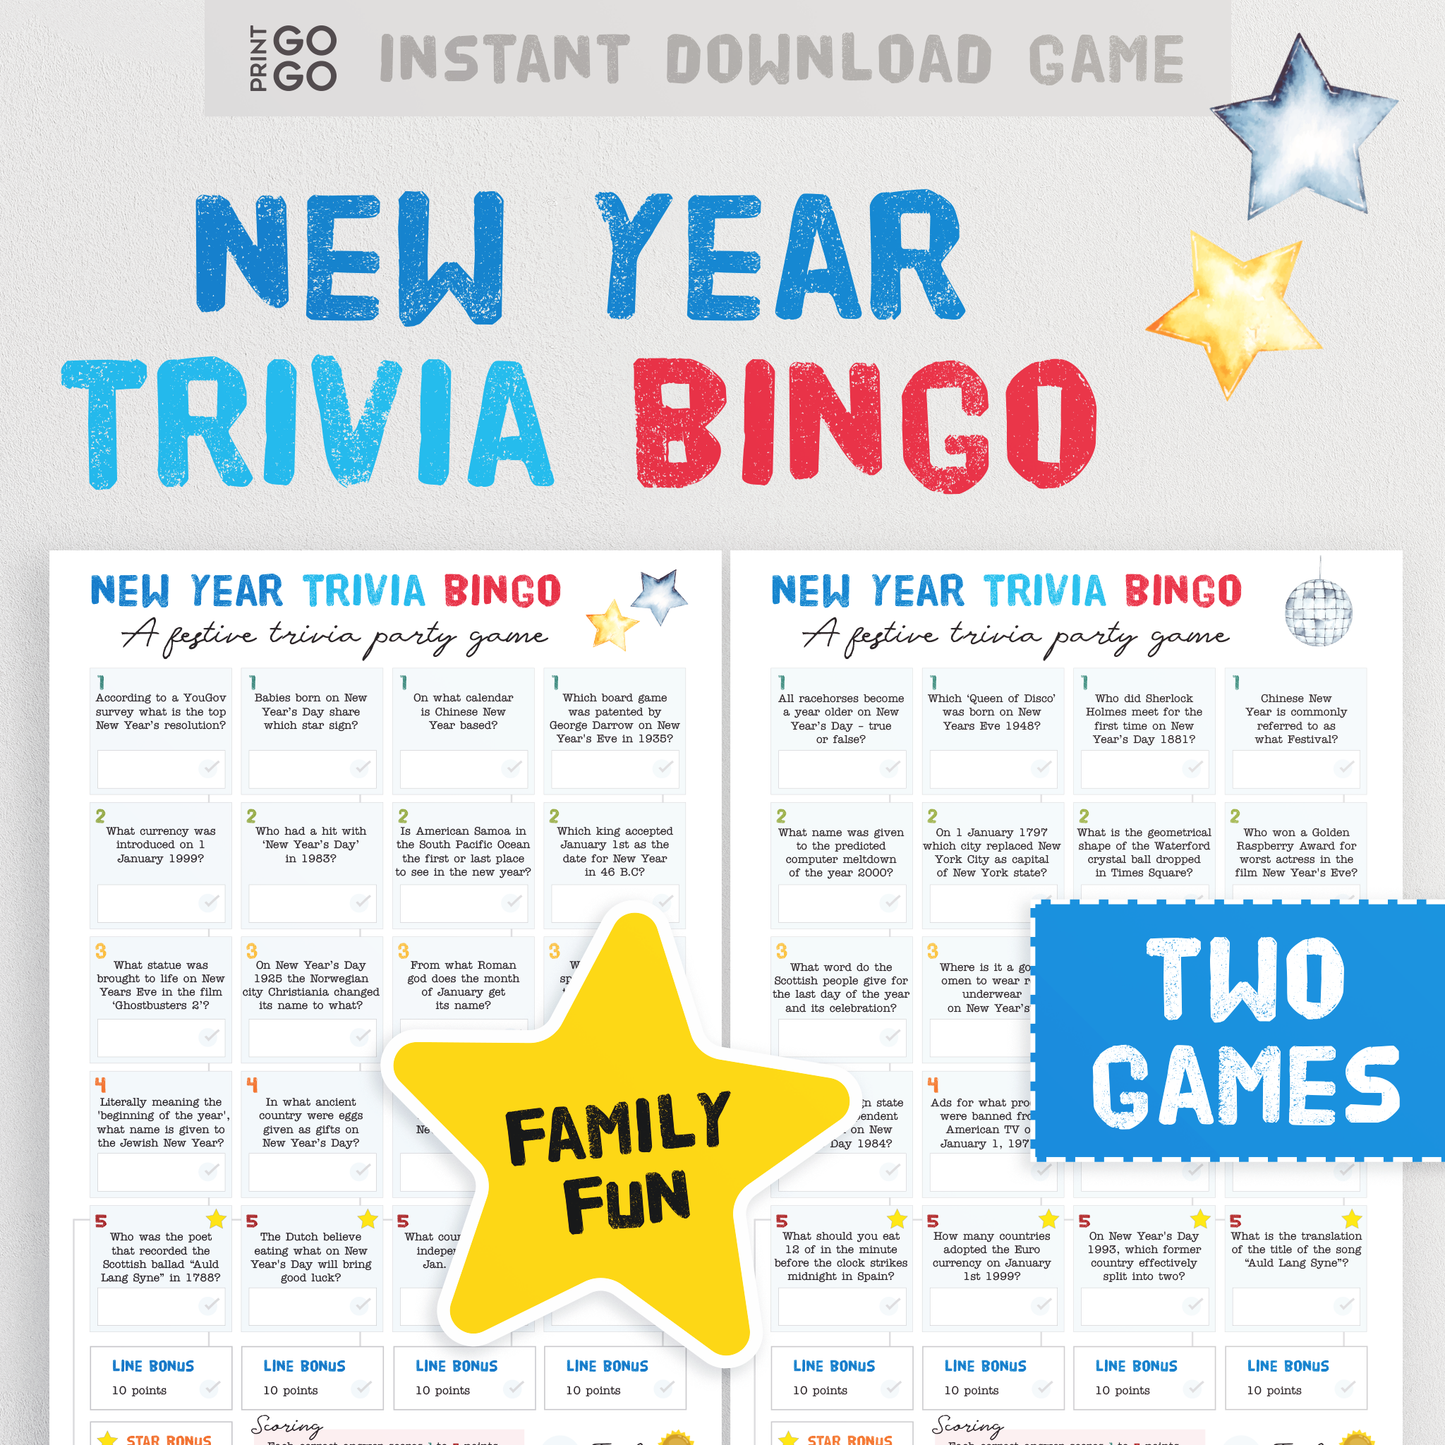 New Year Trivia Bingo - Test Your Festive Knowledge With This Fun Family Quiz Party Game | Christmas Holiday Entertainment